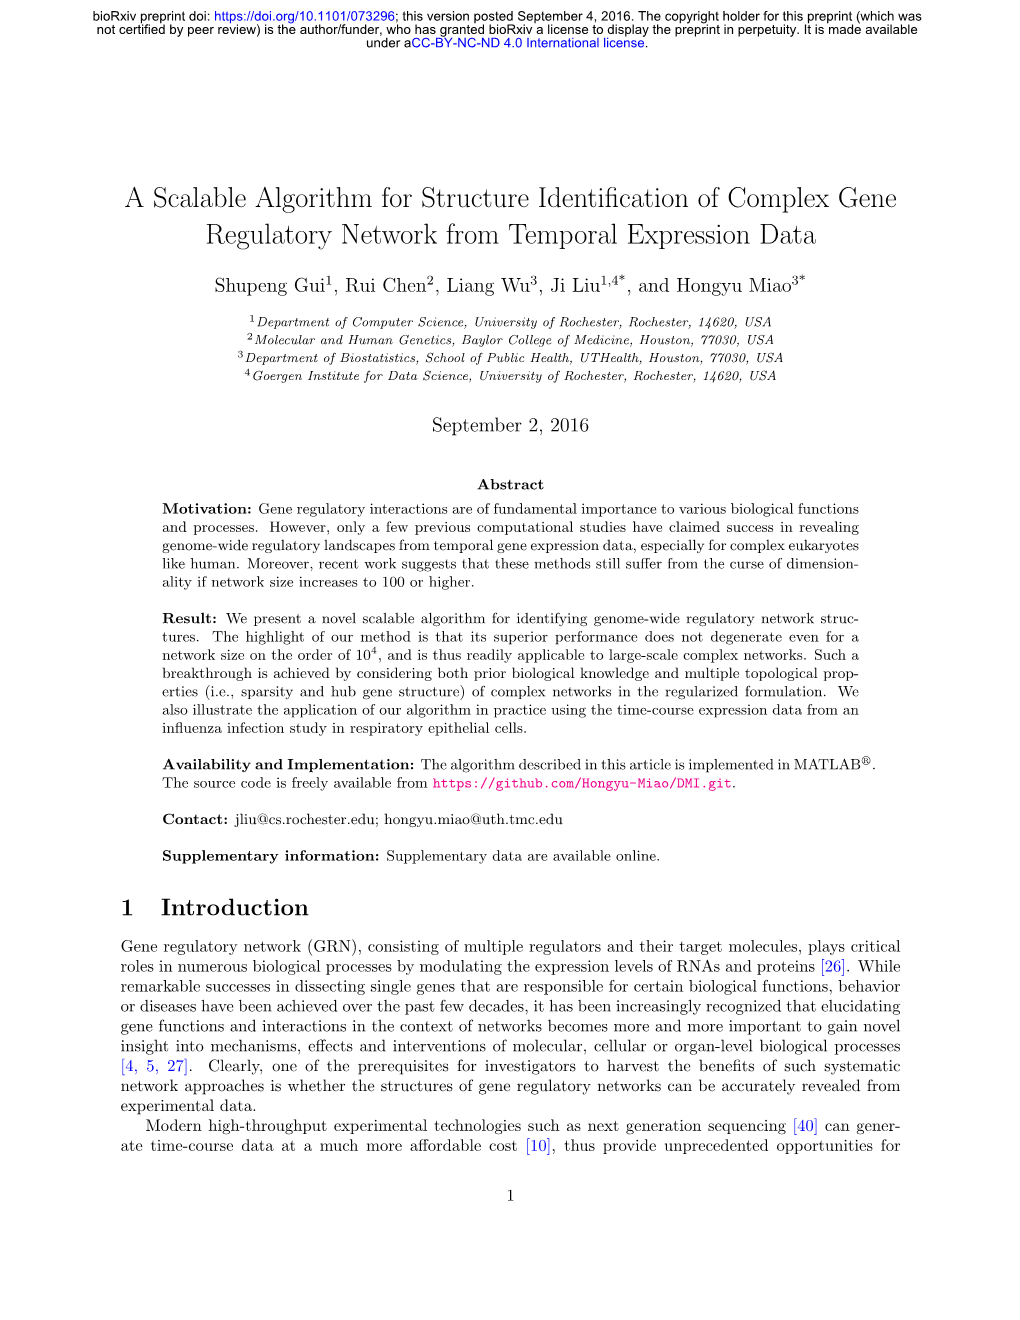 A Scalable Algorithm for Structure Identification of Complex